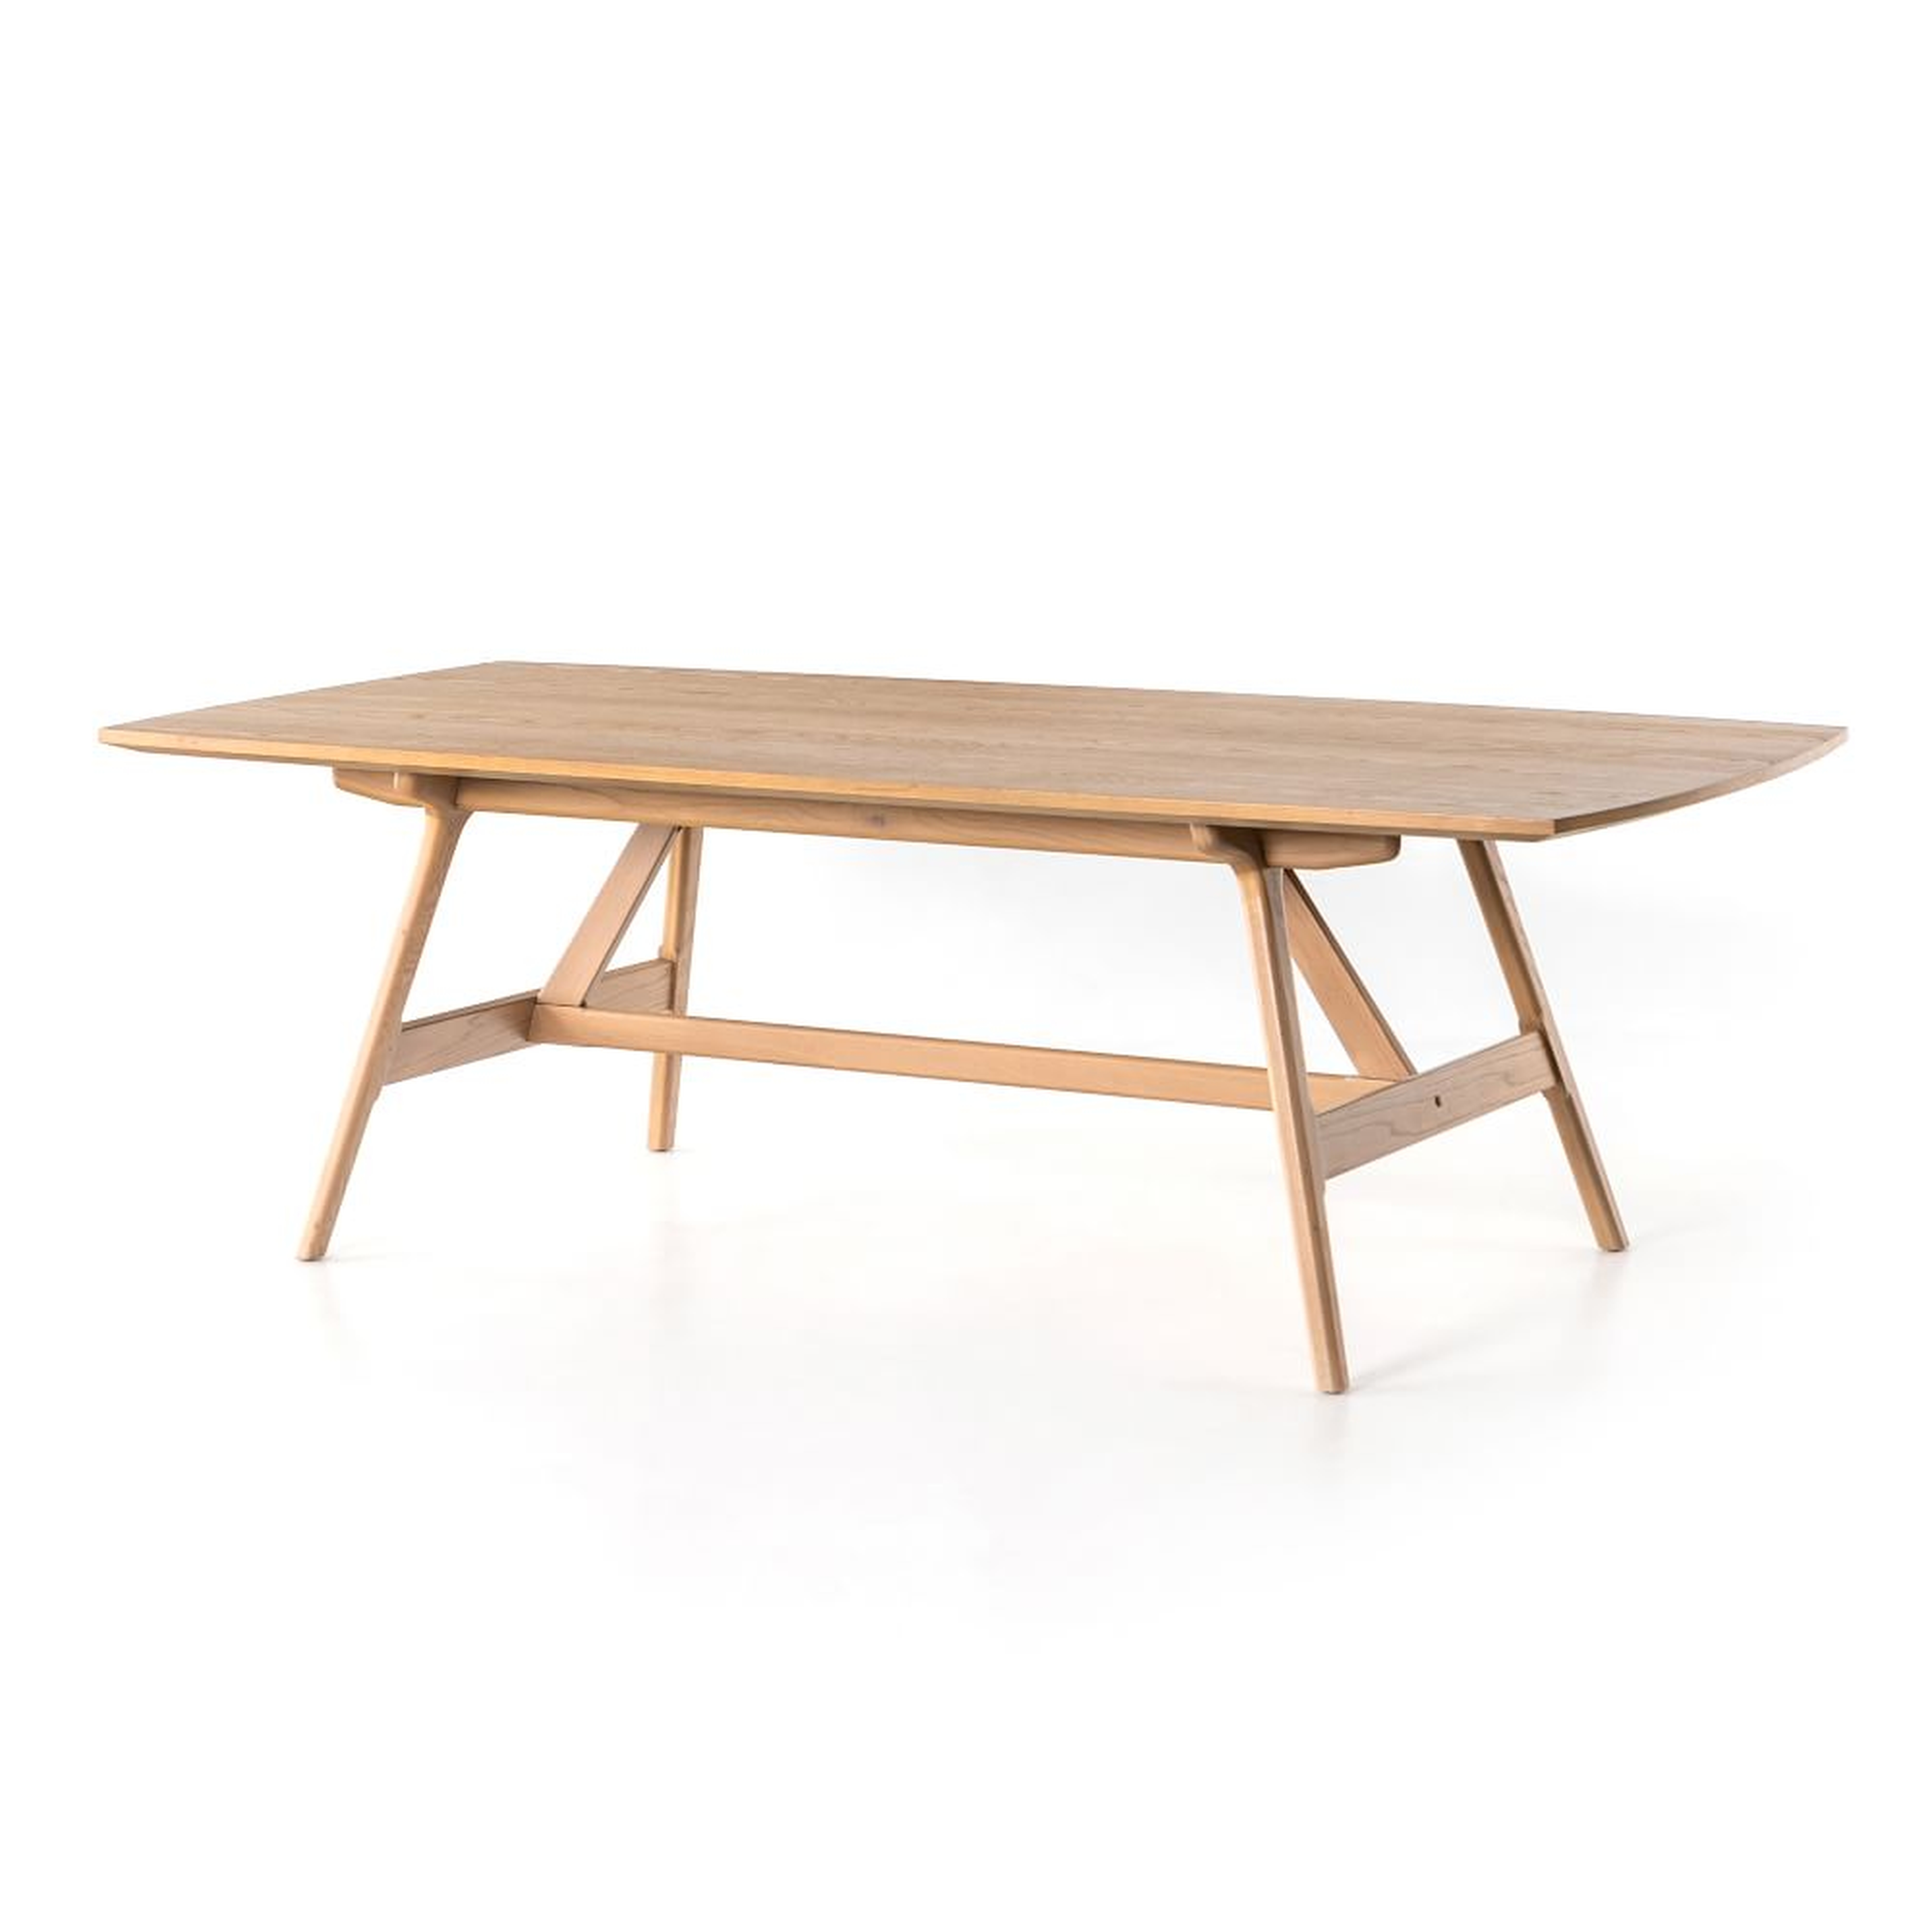 Curved Edge Oak Dining Table - West Elm